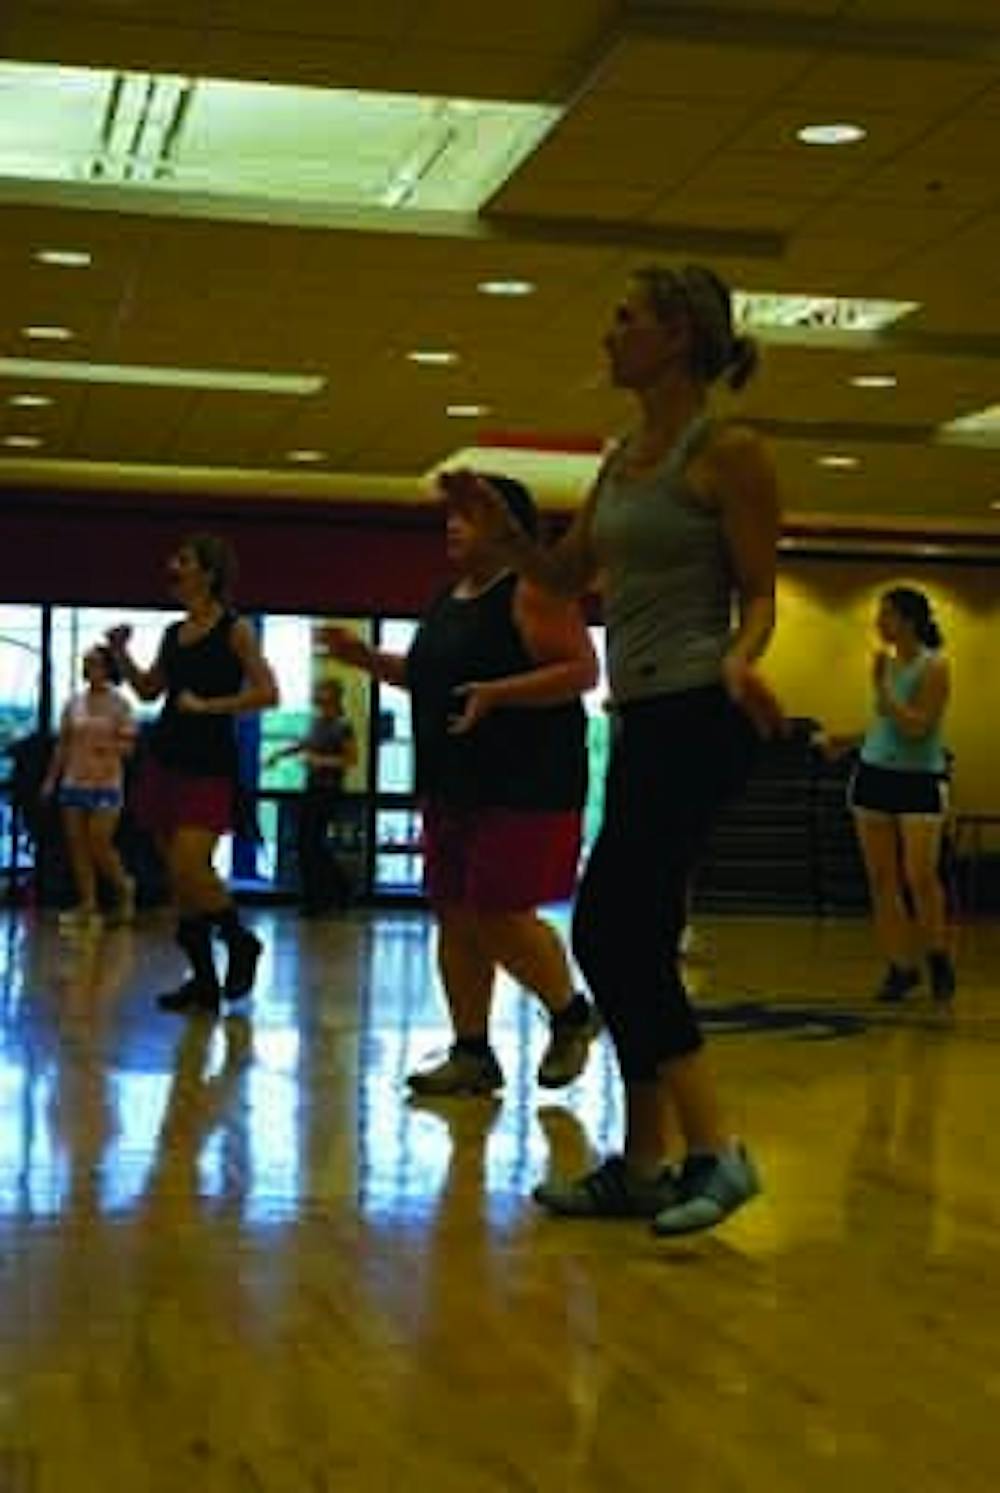 Led by Jackie Pfamatter (headset/mic), students and faculty burn carbs and dance to salsa music Zumba on Tuesday Sept 23rd at 12:00pm in the Fitness Center.